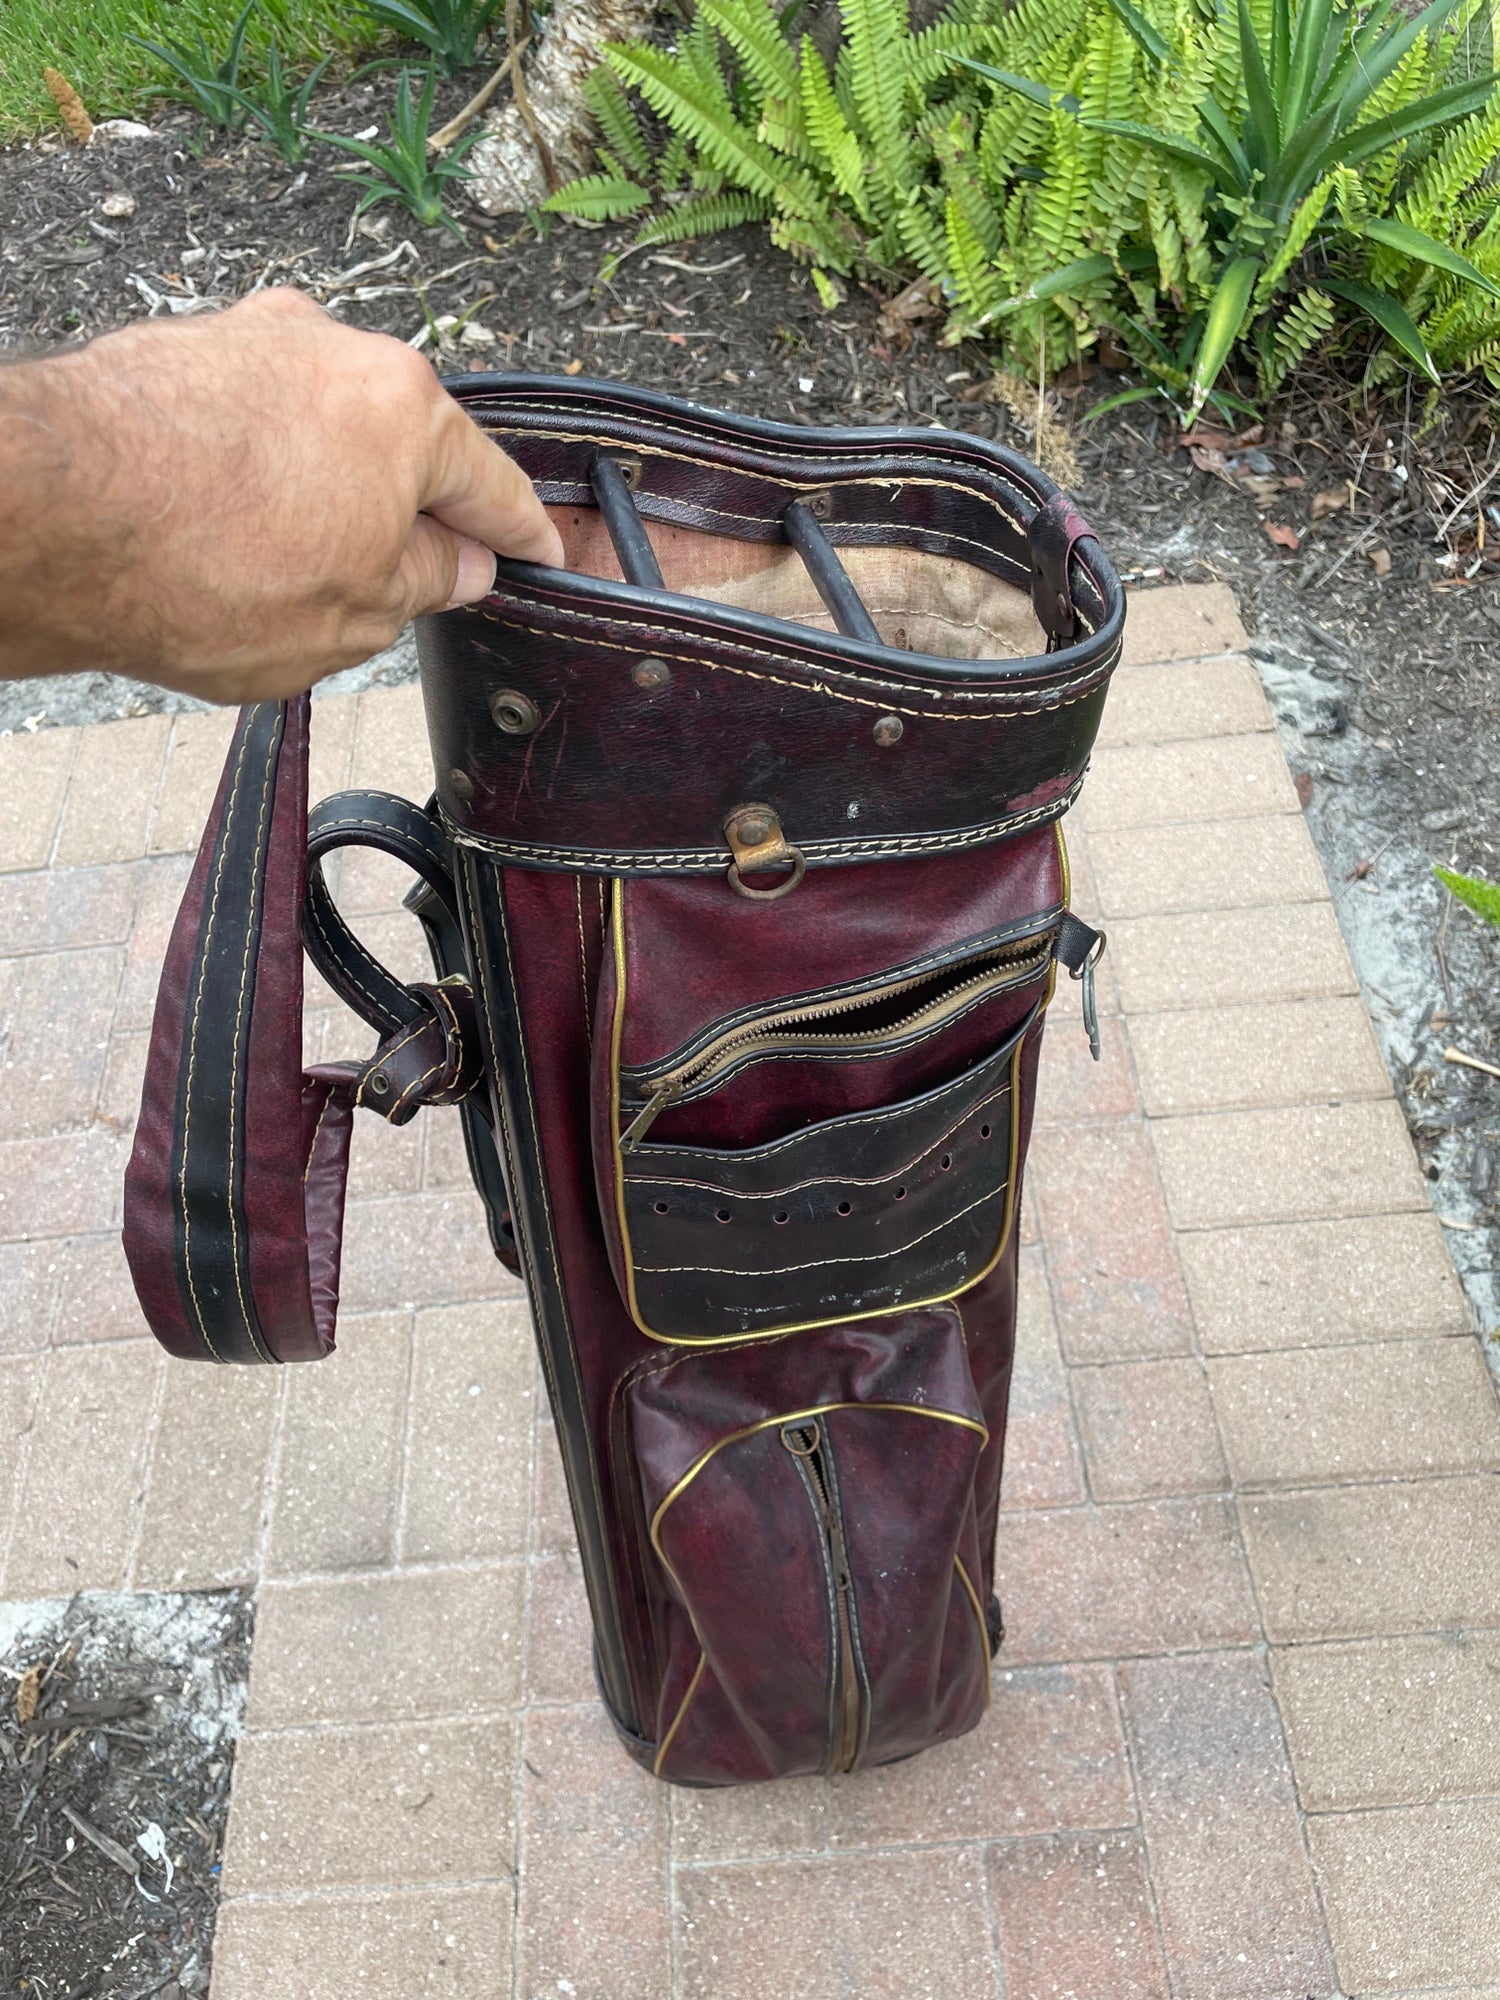 Vintage Golf Bags with Collection of Clubs